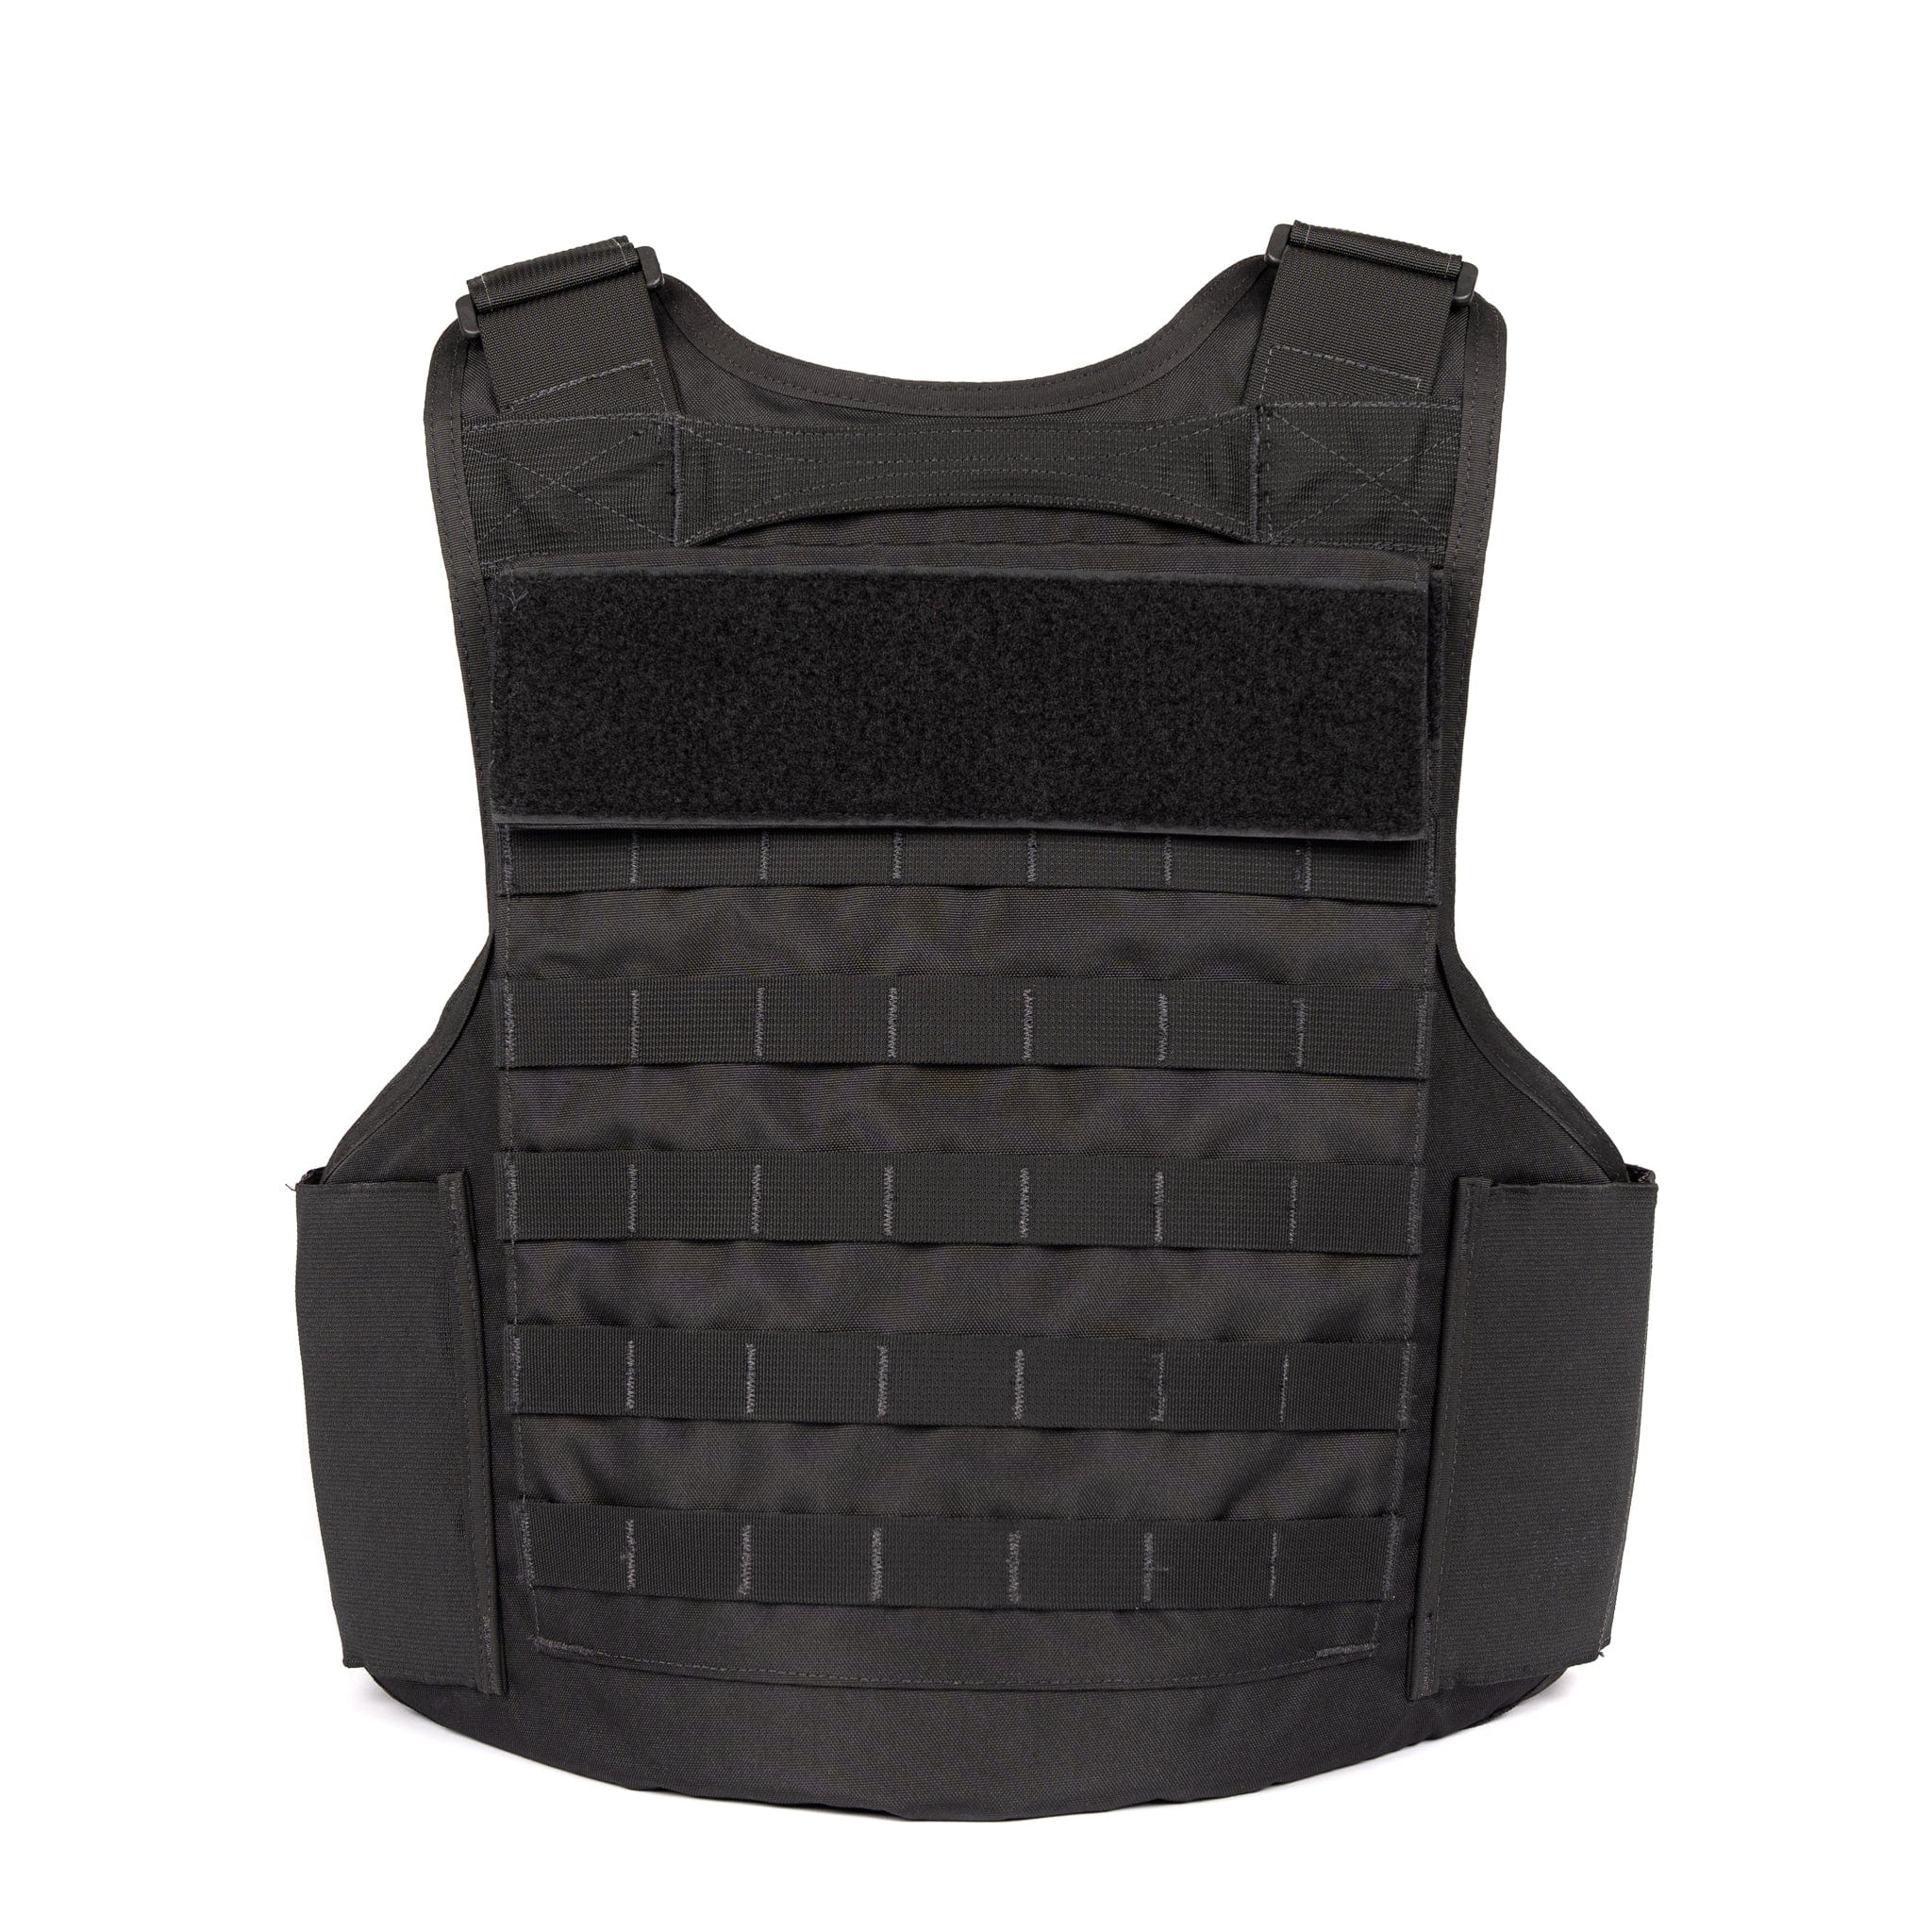 How do you make a reinforced tactical vest to submit?